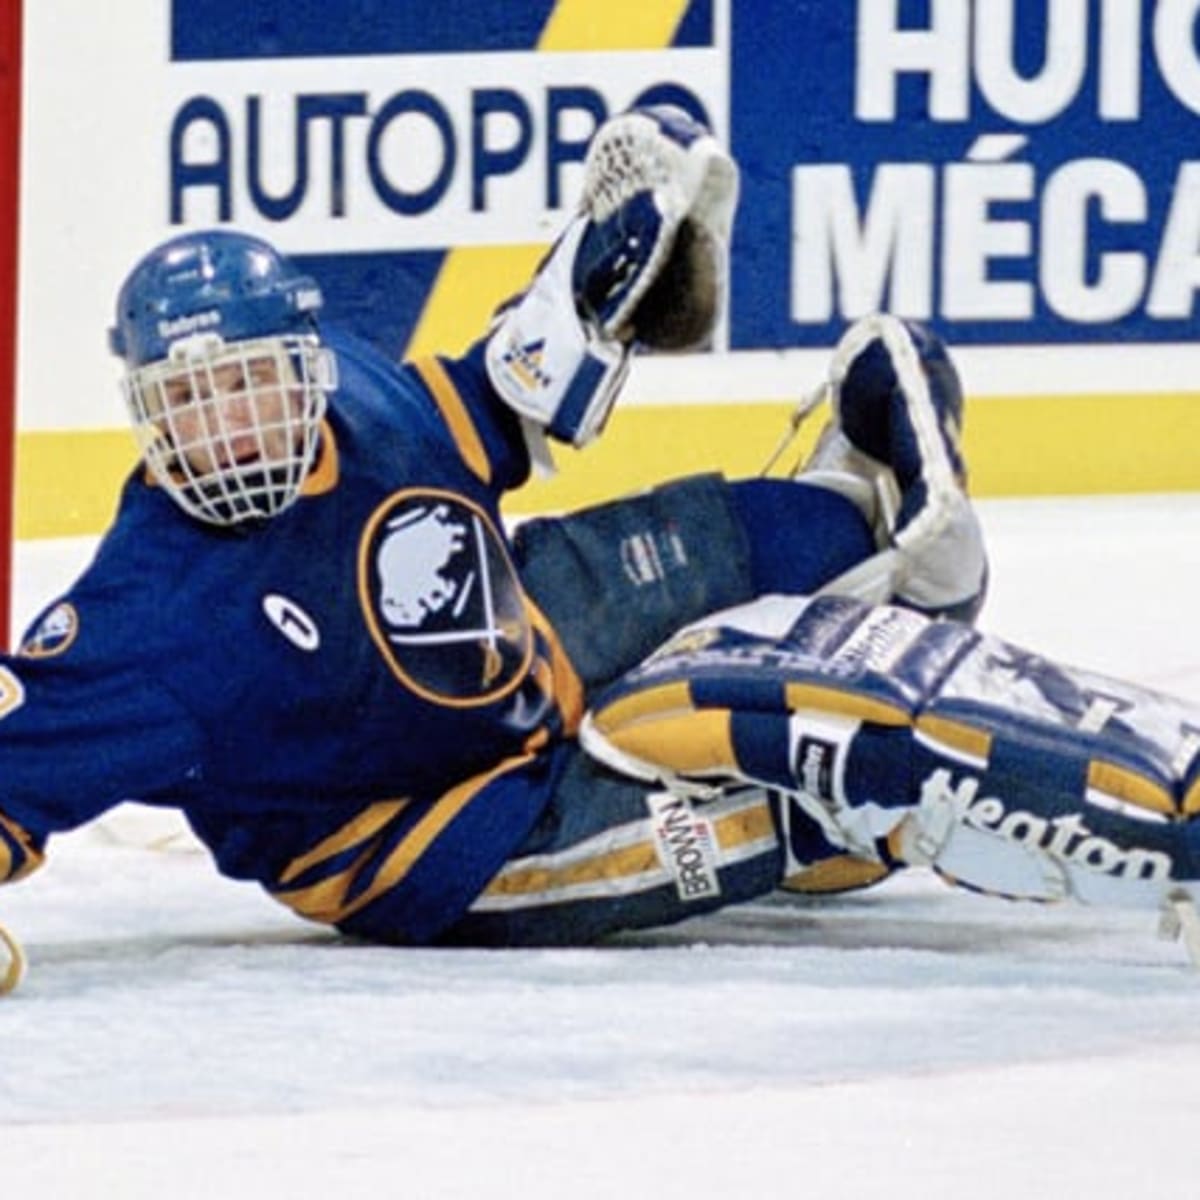 Sabres to retire Hasek's jersey on Jan. 13 - NBC Sports